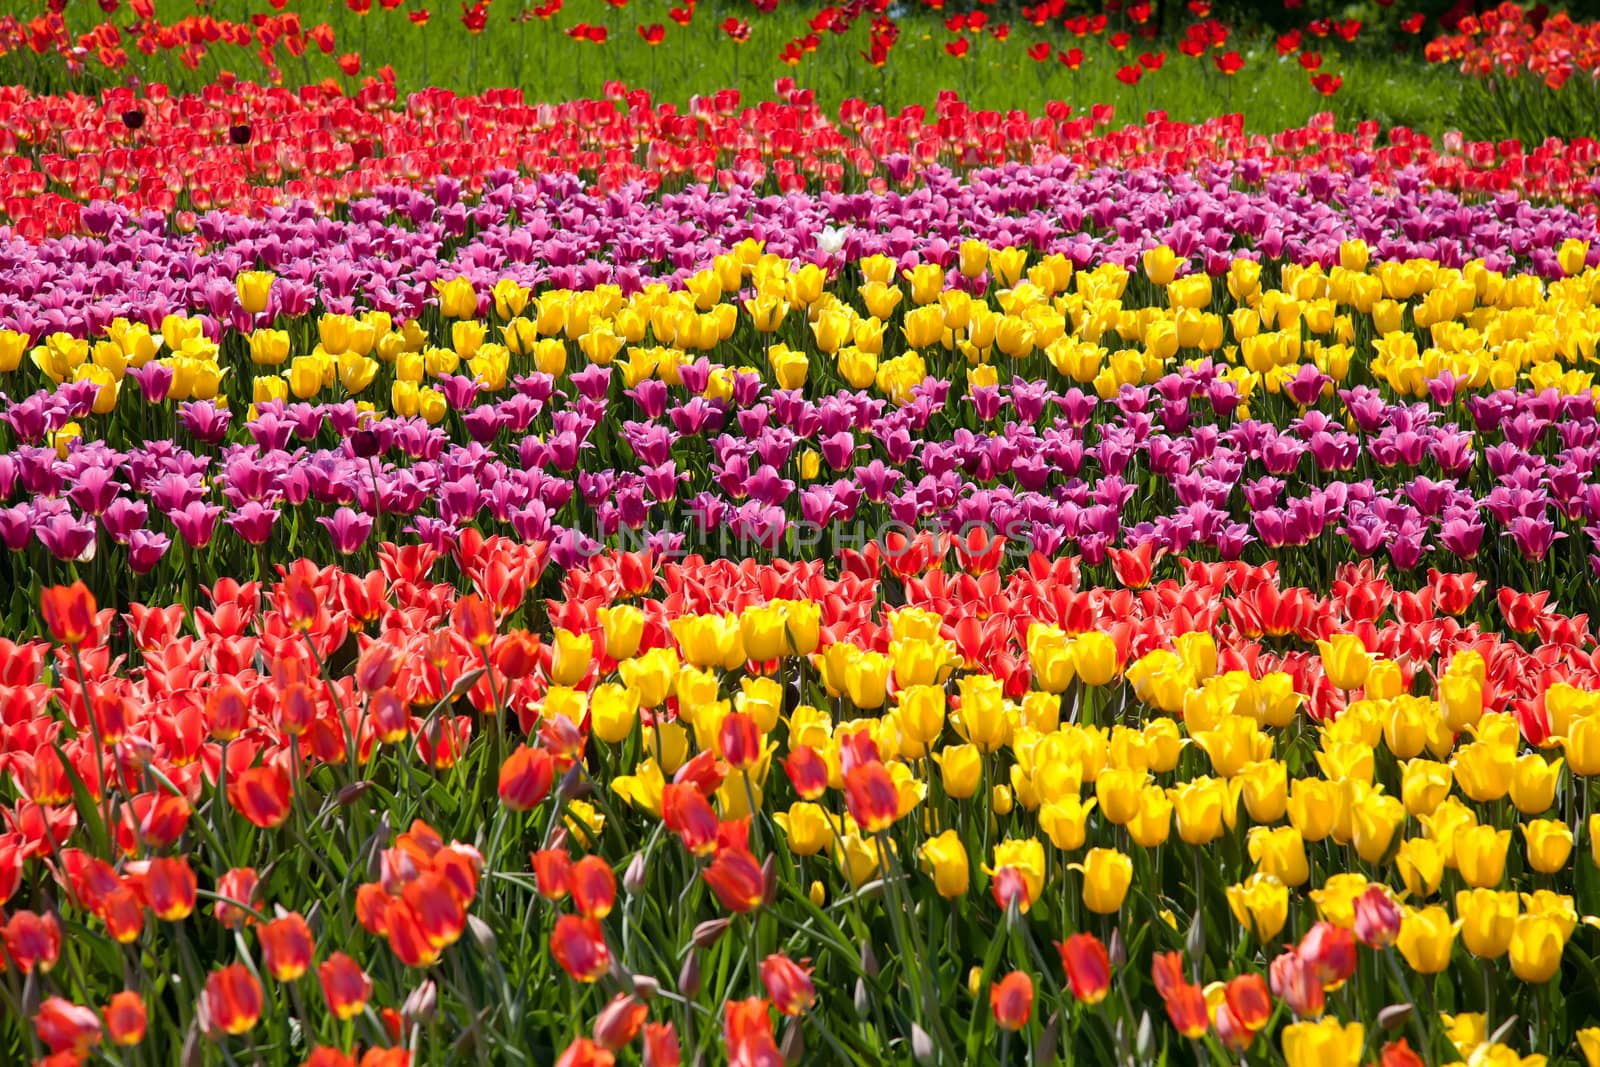 Stripes made with tulips on flower bed